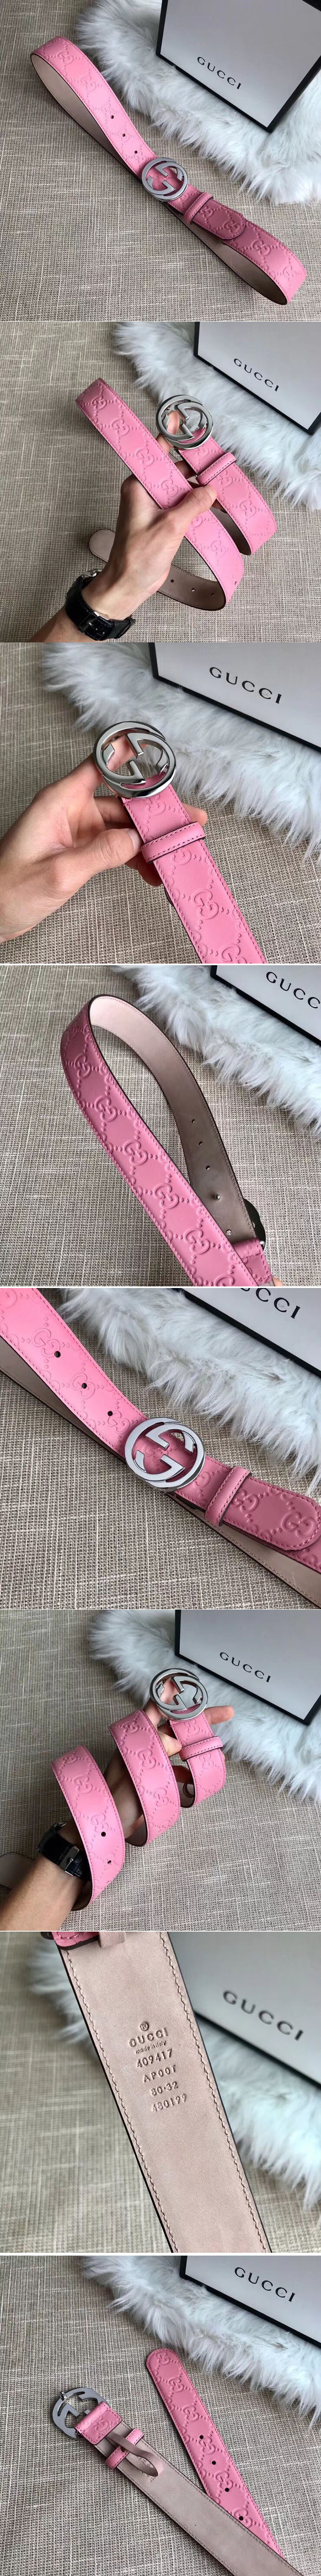 Replica Gucci 409417 35mm Signature leather belt Pink Leather Silver G buckle